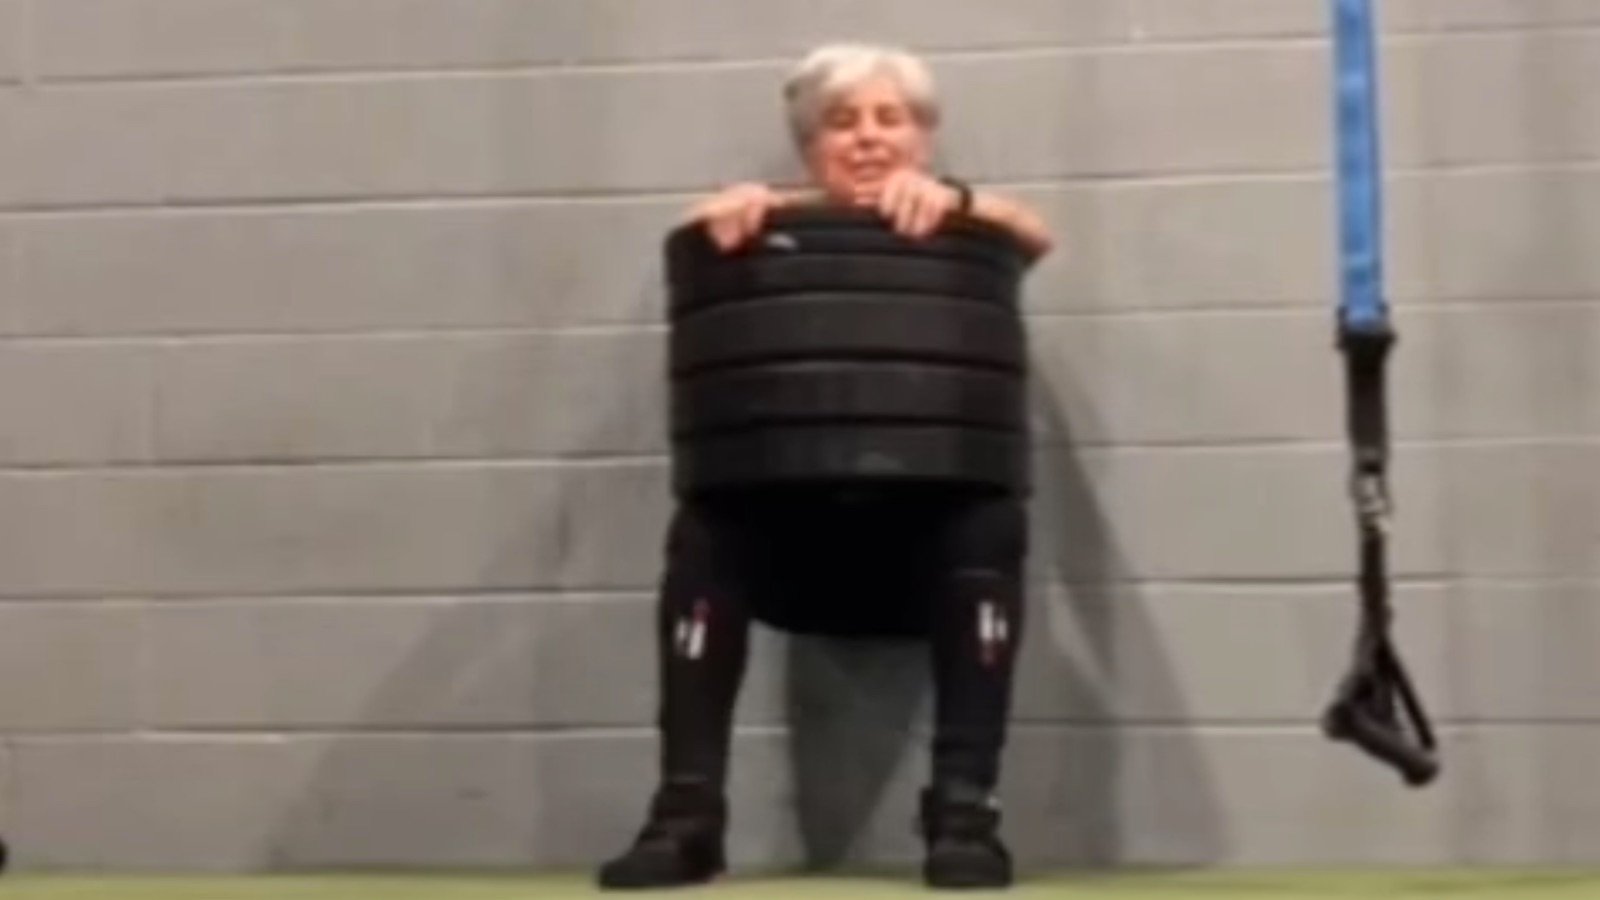 74-year-old-mary-duffy-wall-sits-with-97.5-kilograms-(215-pounds)-of-added-weight-for-2-minutes-–-breaking-muscle